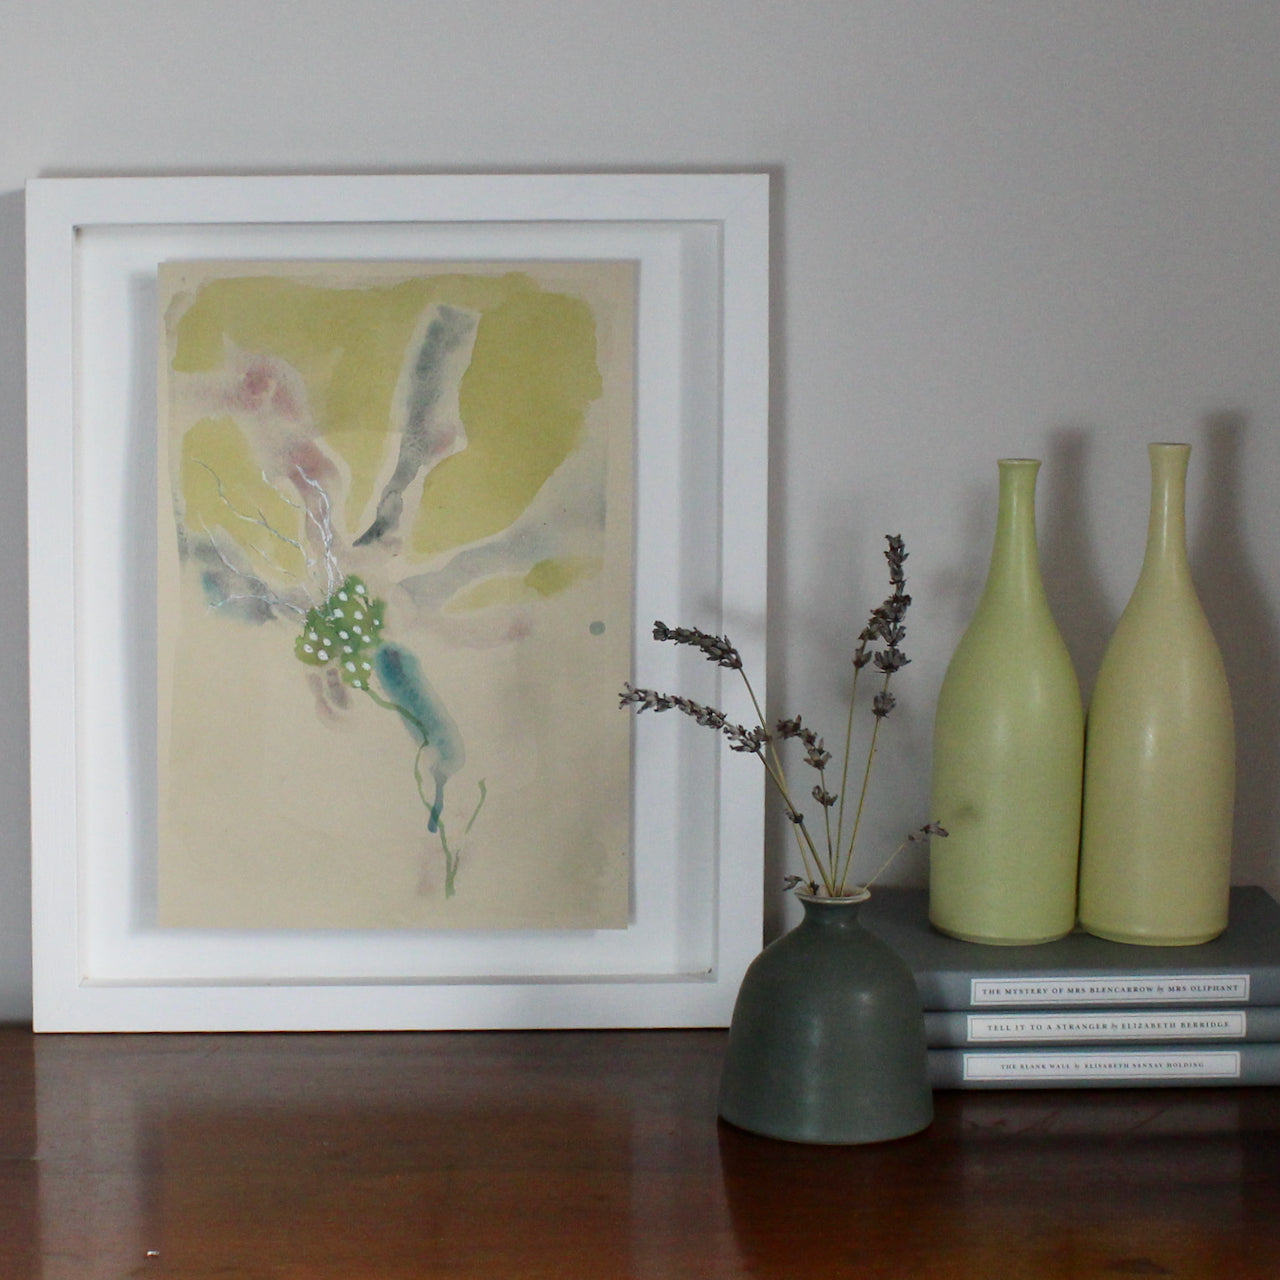 Watercolour of an abstract yellow flower with purple and green details by Tara Leaver  it is in a white frame propped next to two pale yellow ceramic bottles by Lucy Burley